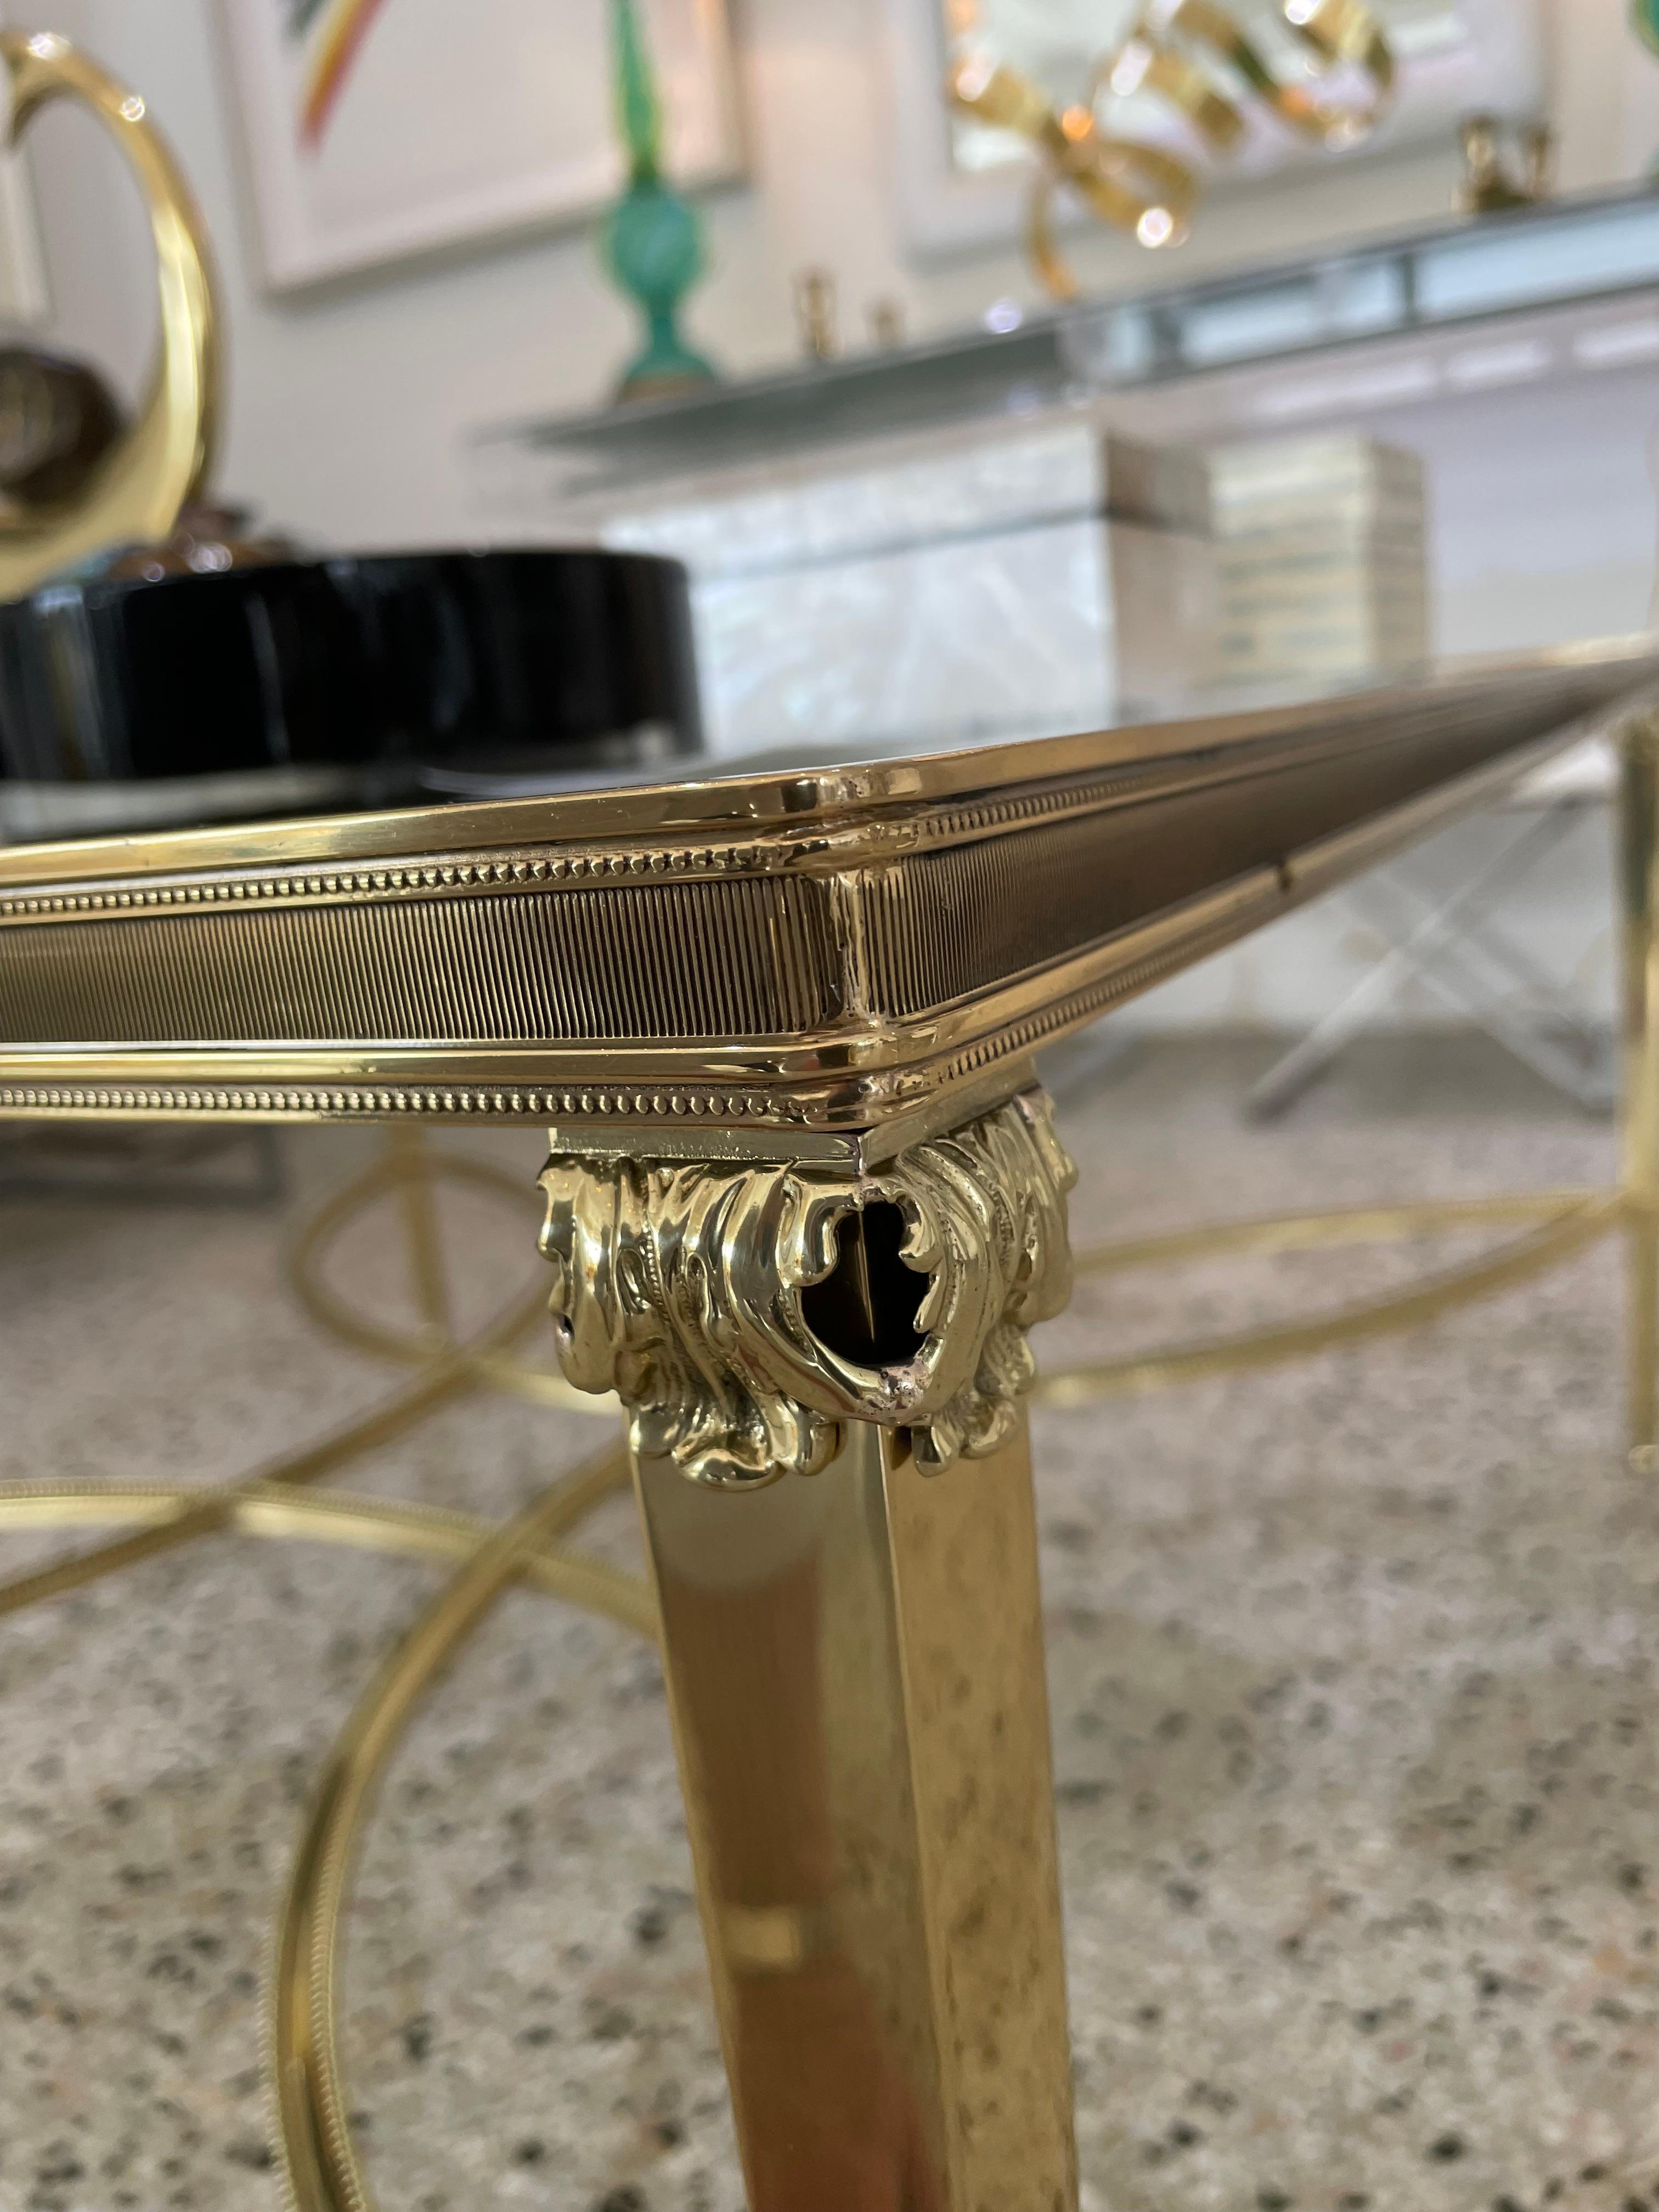 This stylish, chic and large scale cocktail table was created by the iconic French firm of Maison Jansen, and it dates to the 1960s-1970s.

Note: The brass has been professionally polished and lacquered, so no tarnishing.

Note: The glass has a